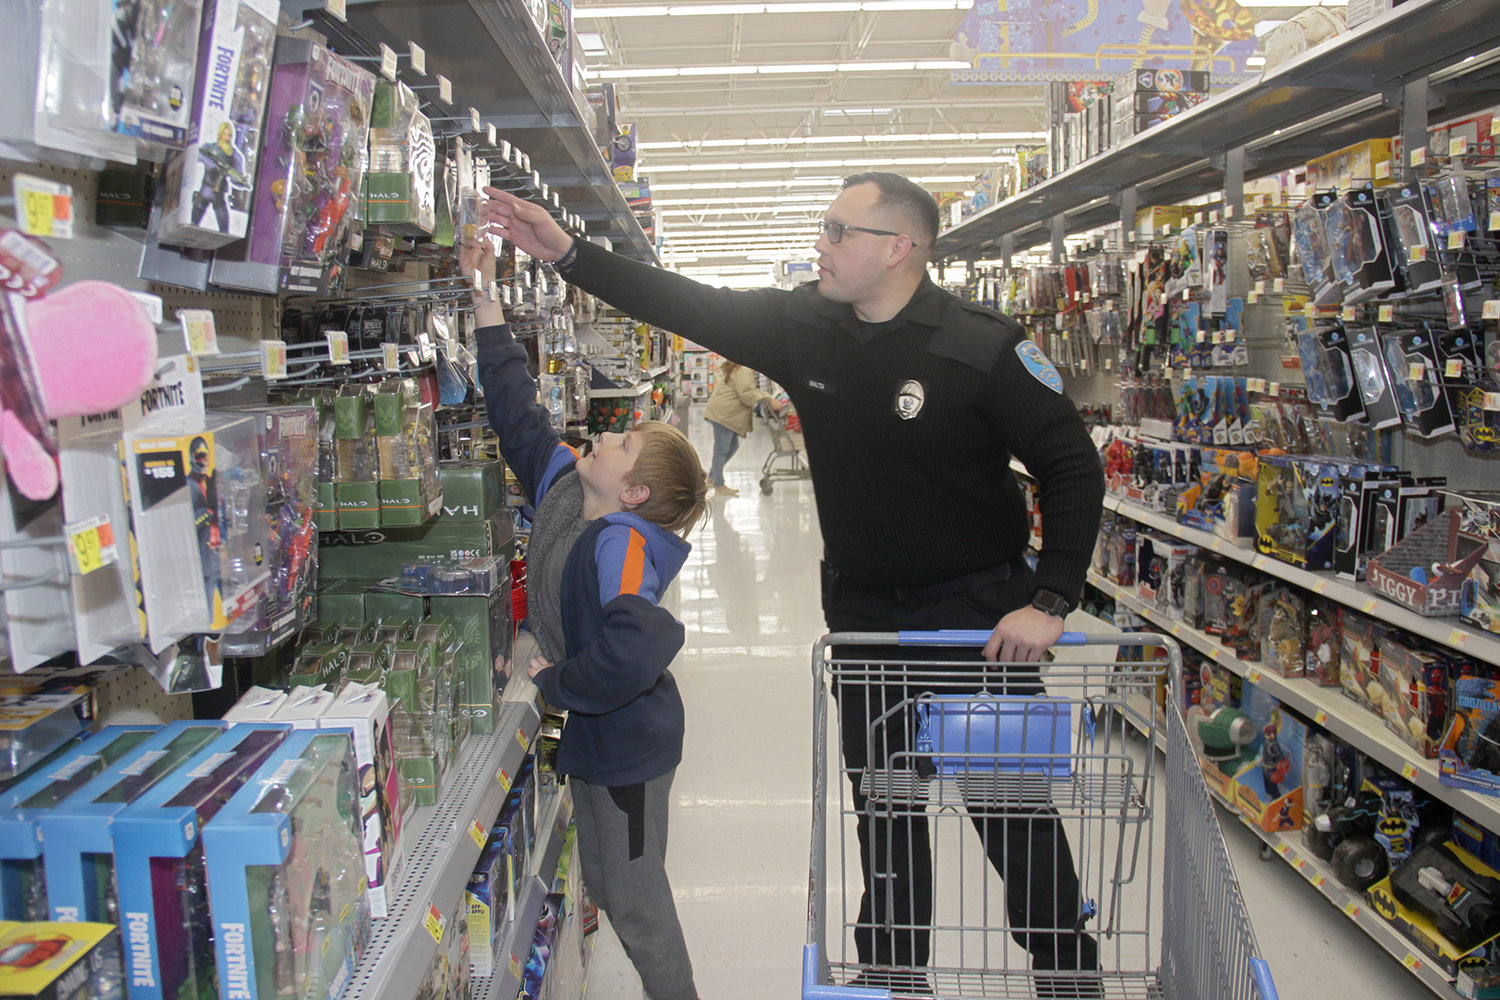 A LITTLE HELP — Officer J. Malta helps Marcus, 9, grab a Beyblade toy from a high hanger while the two were shopping together at Walmart Saturday during Truesdale’s Shop With A Cop program. Eight children from three families got to go on a shopping trip.